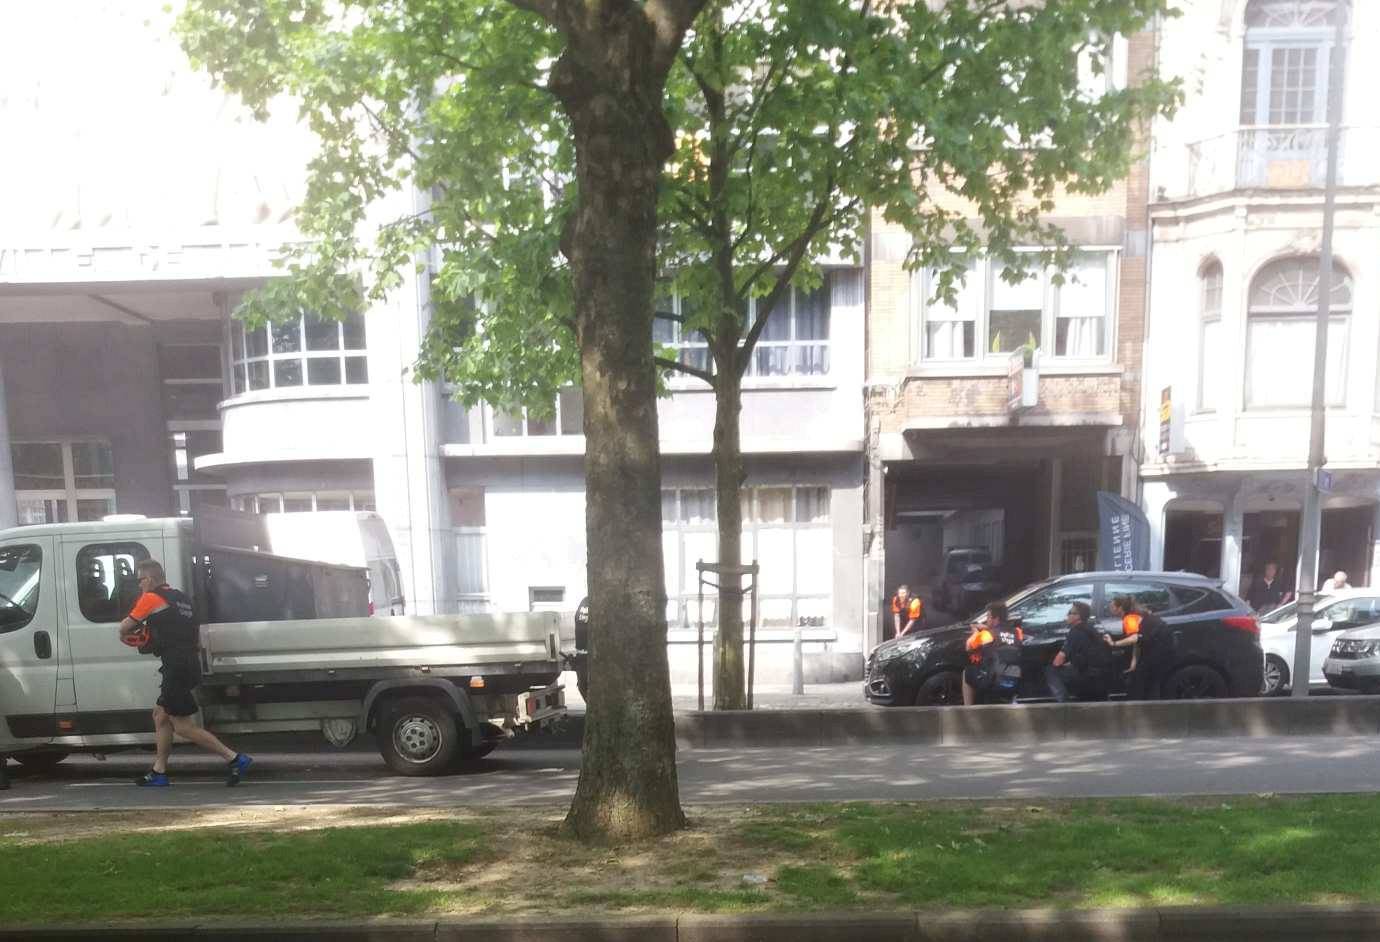 Police officers are seen on the scene of a shooting in Liege